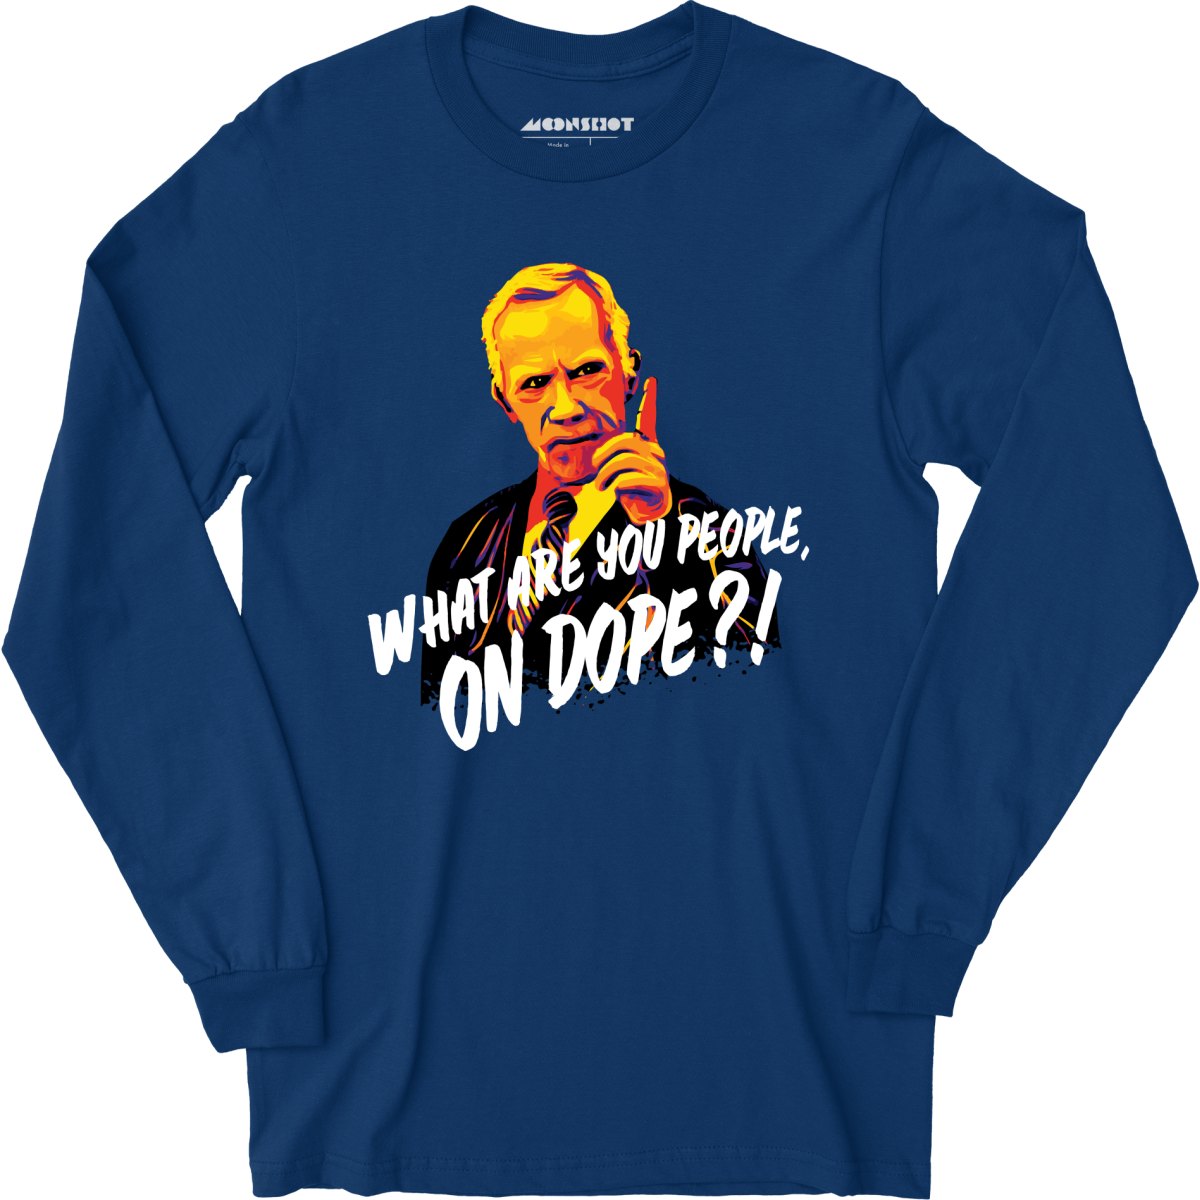 Mr. Hand - What Are You People, On Dope? - Long Sleeve T-Shirt